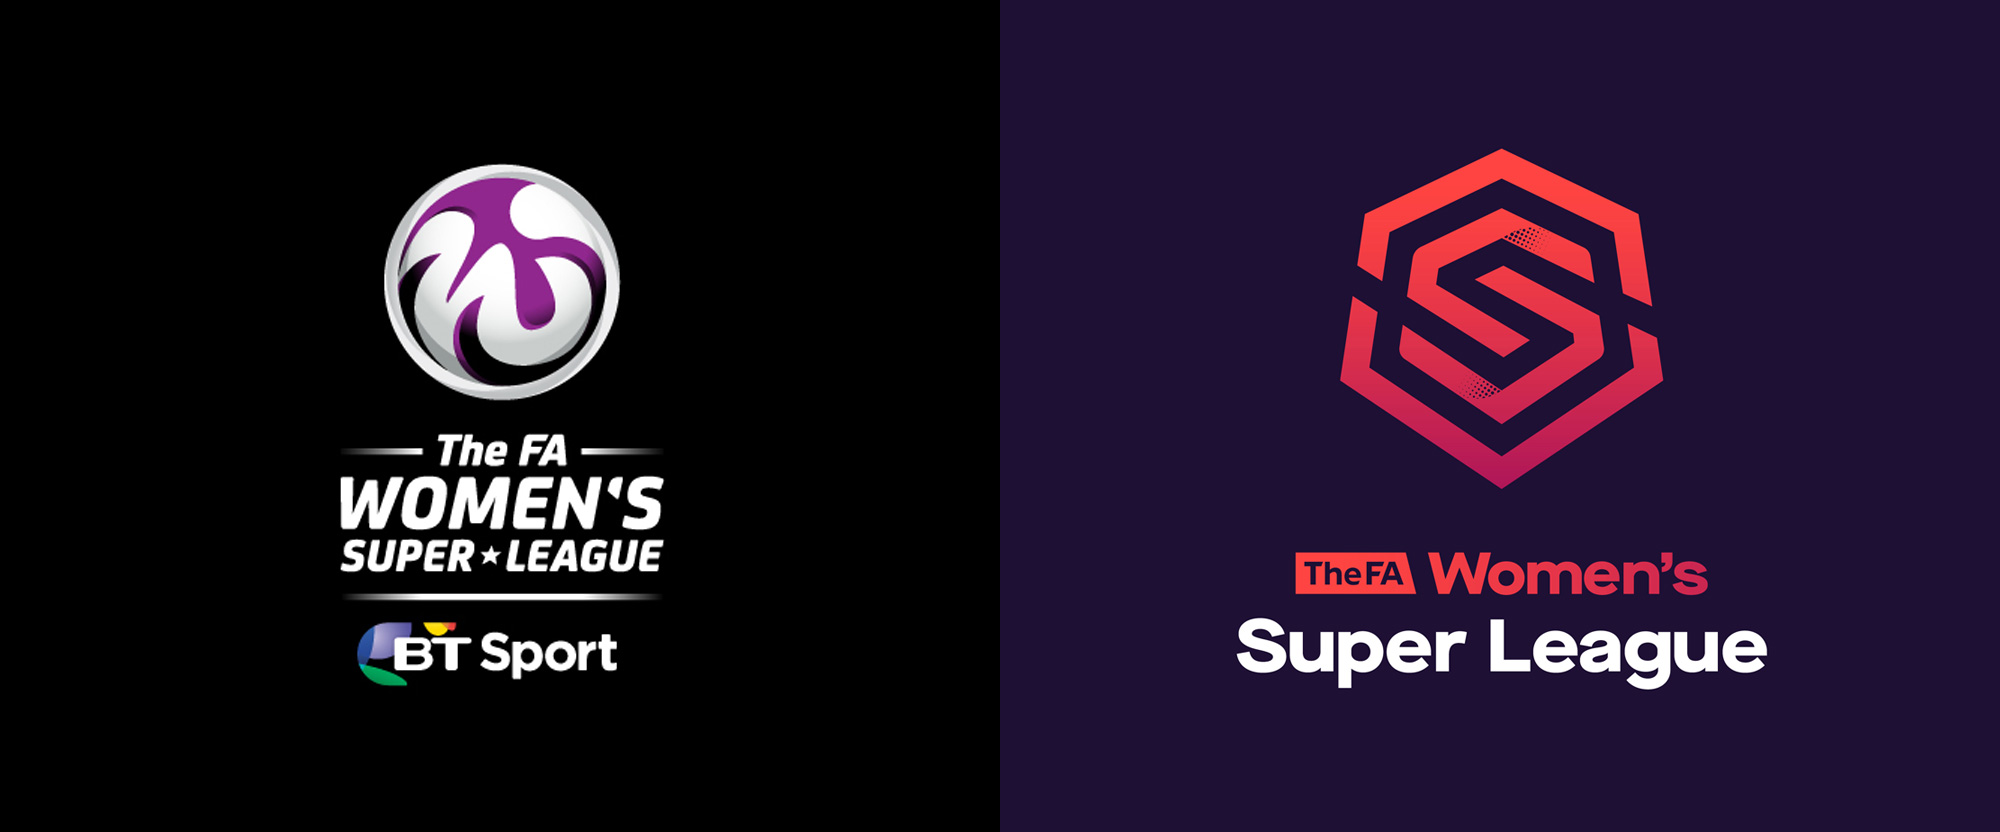 New Logos and Identity for FA Women’s Leagues by Nomad